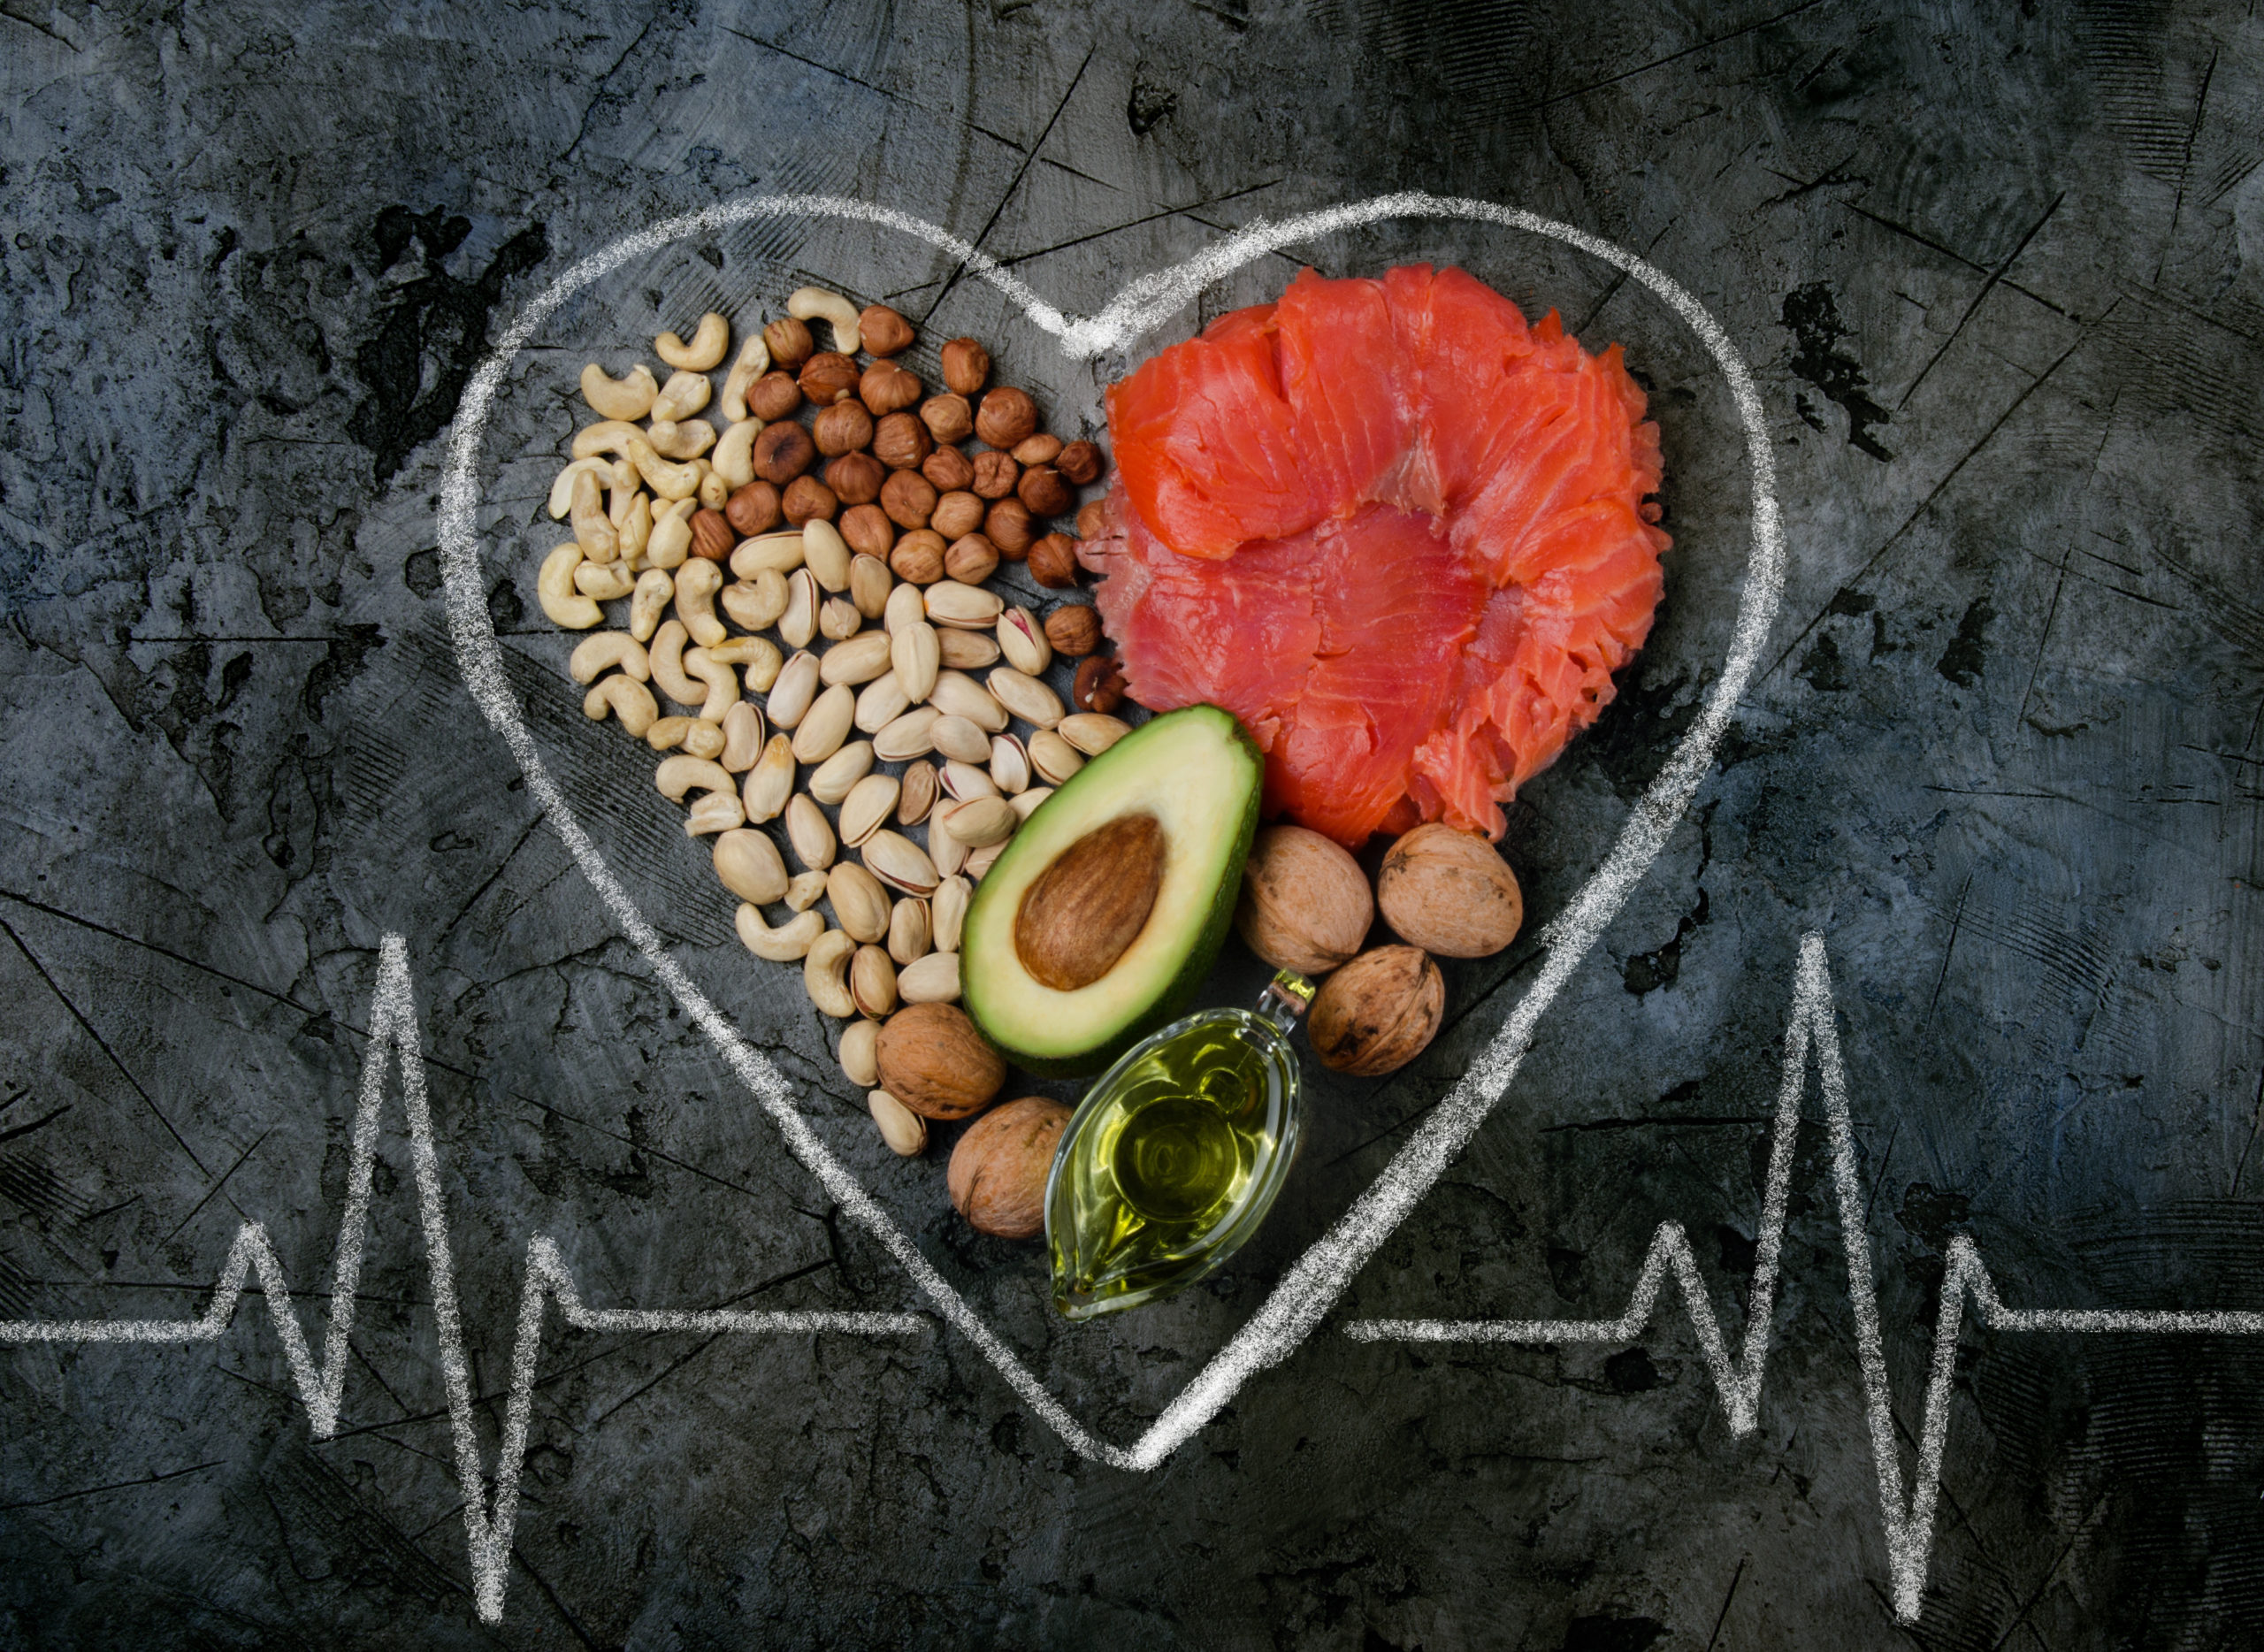 Graphic demonstrated heart-healthy food choices